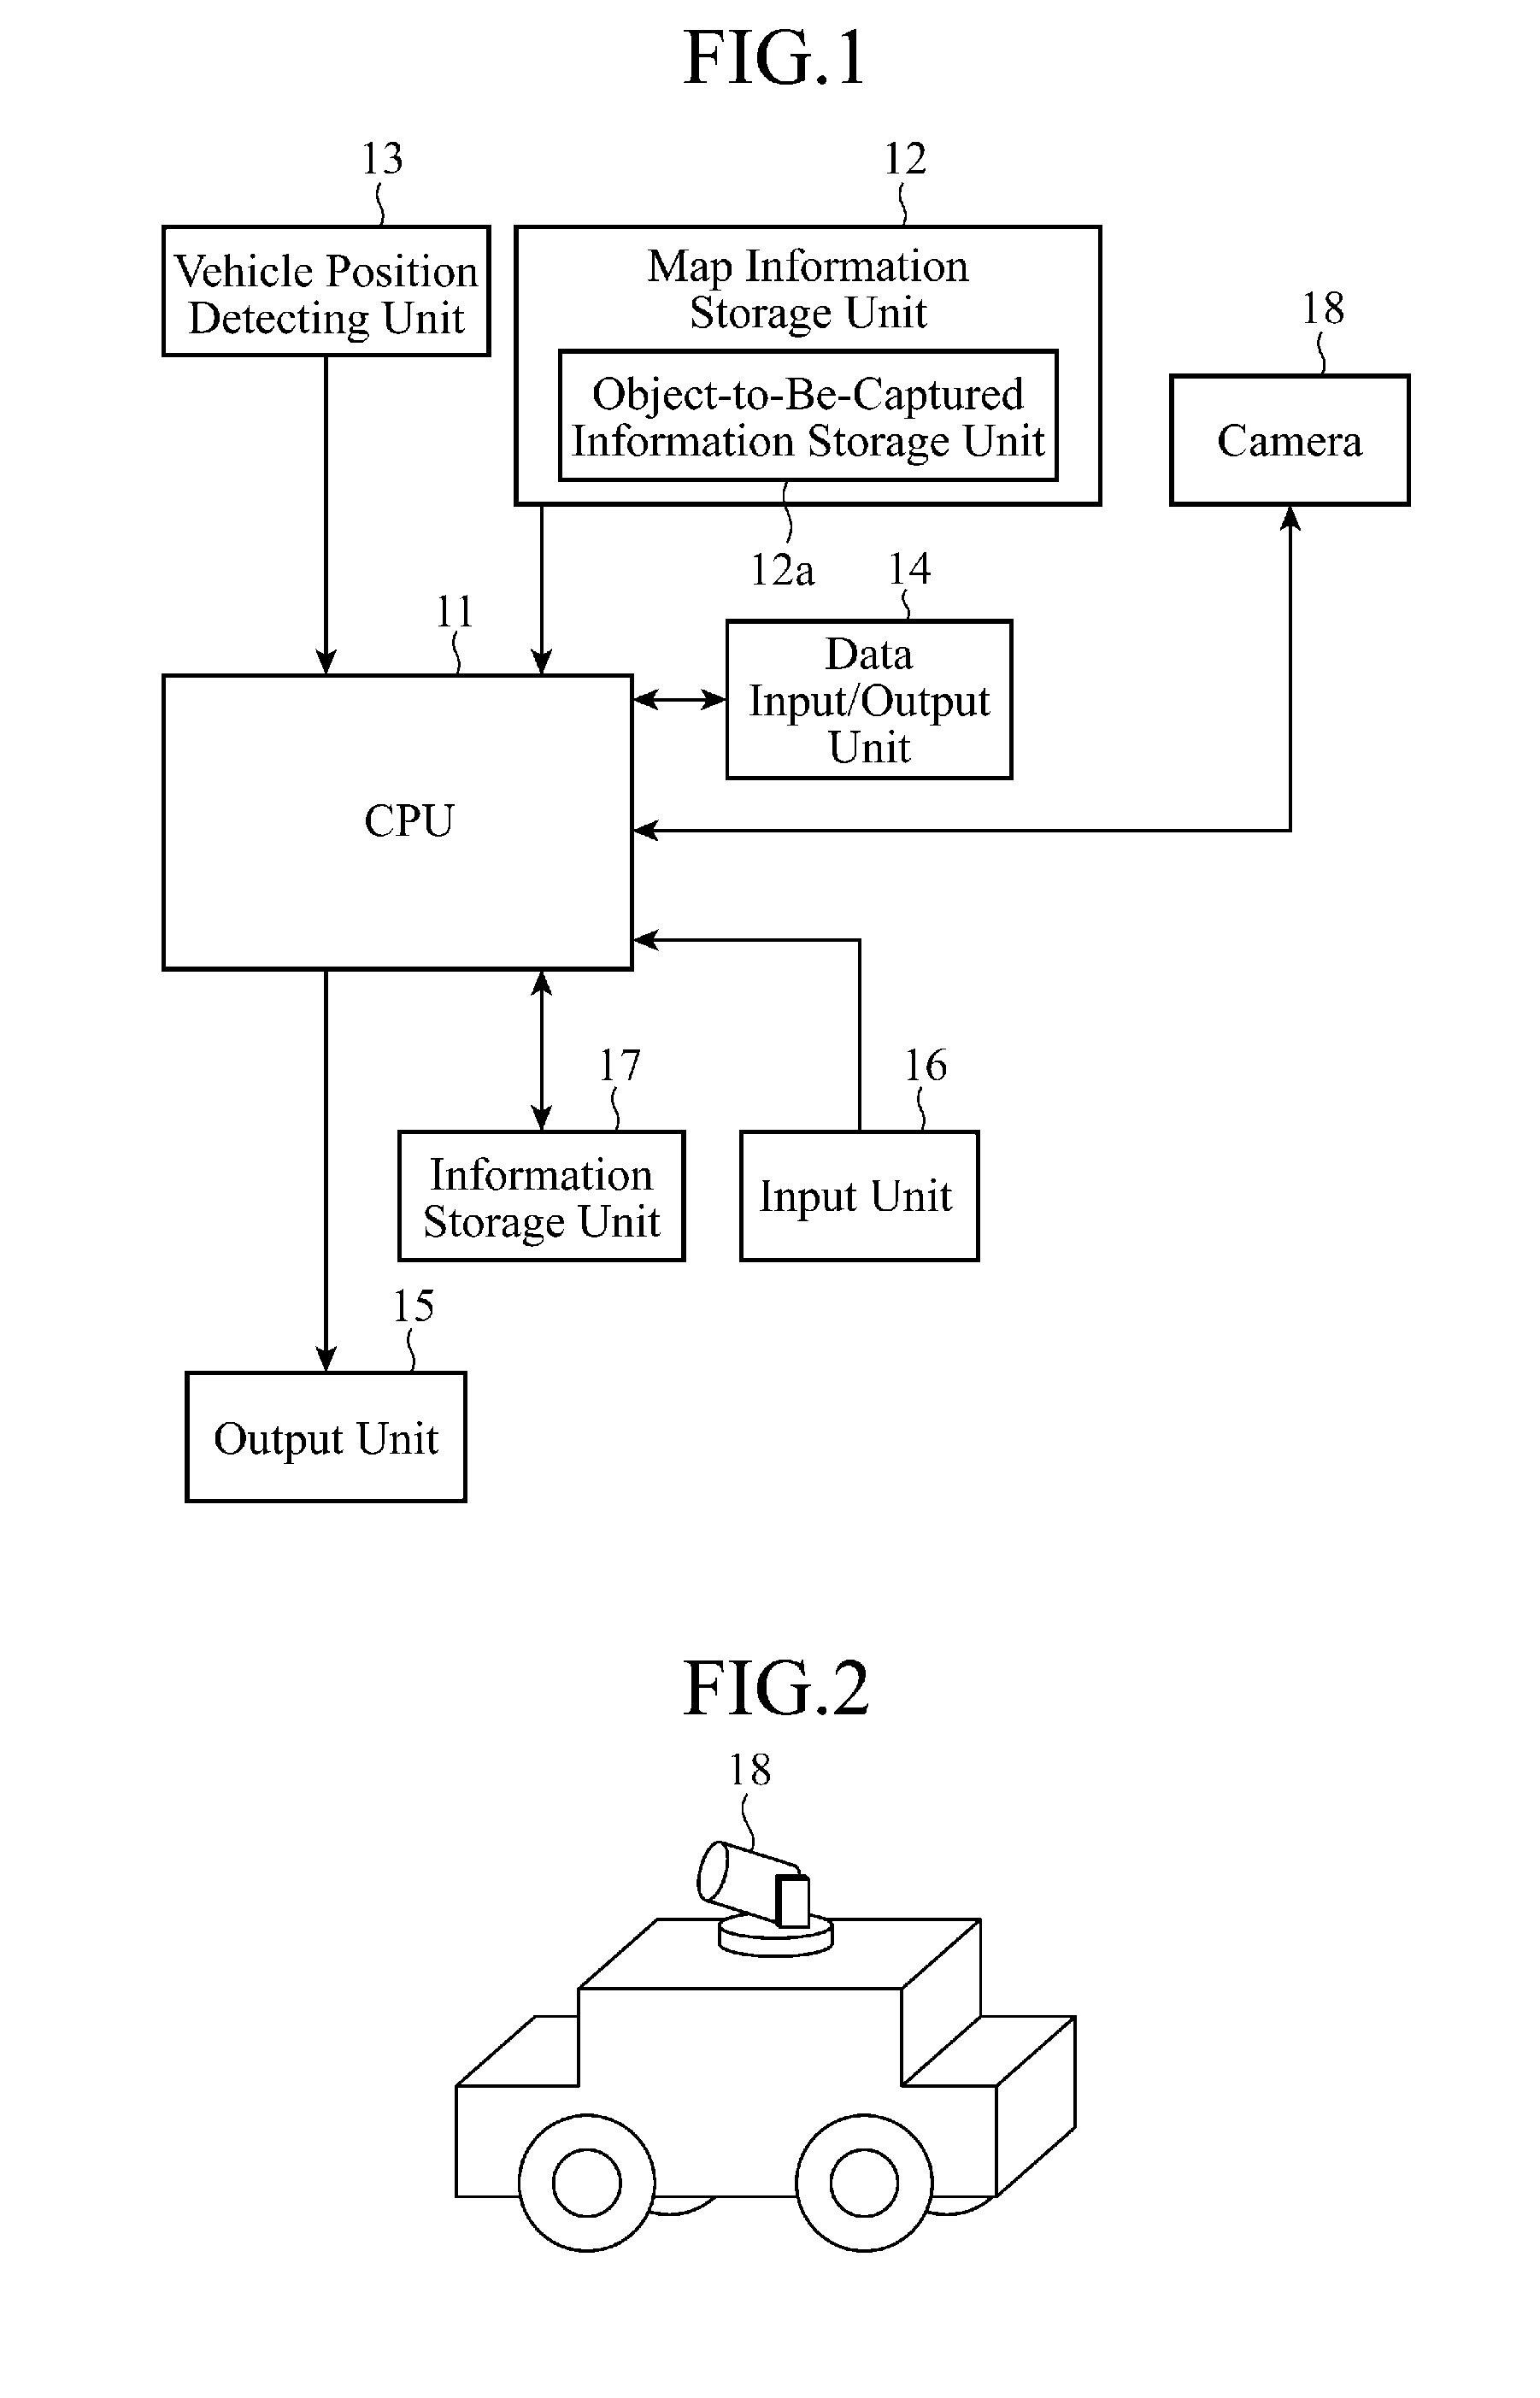 Image capturing system for vehicle